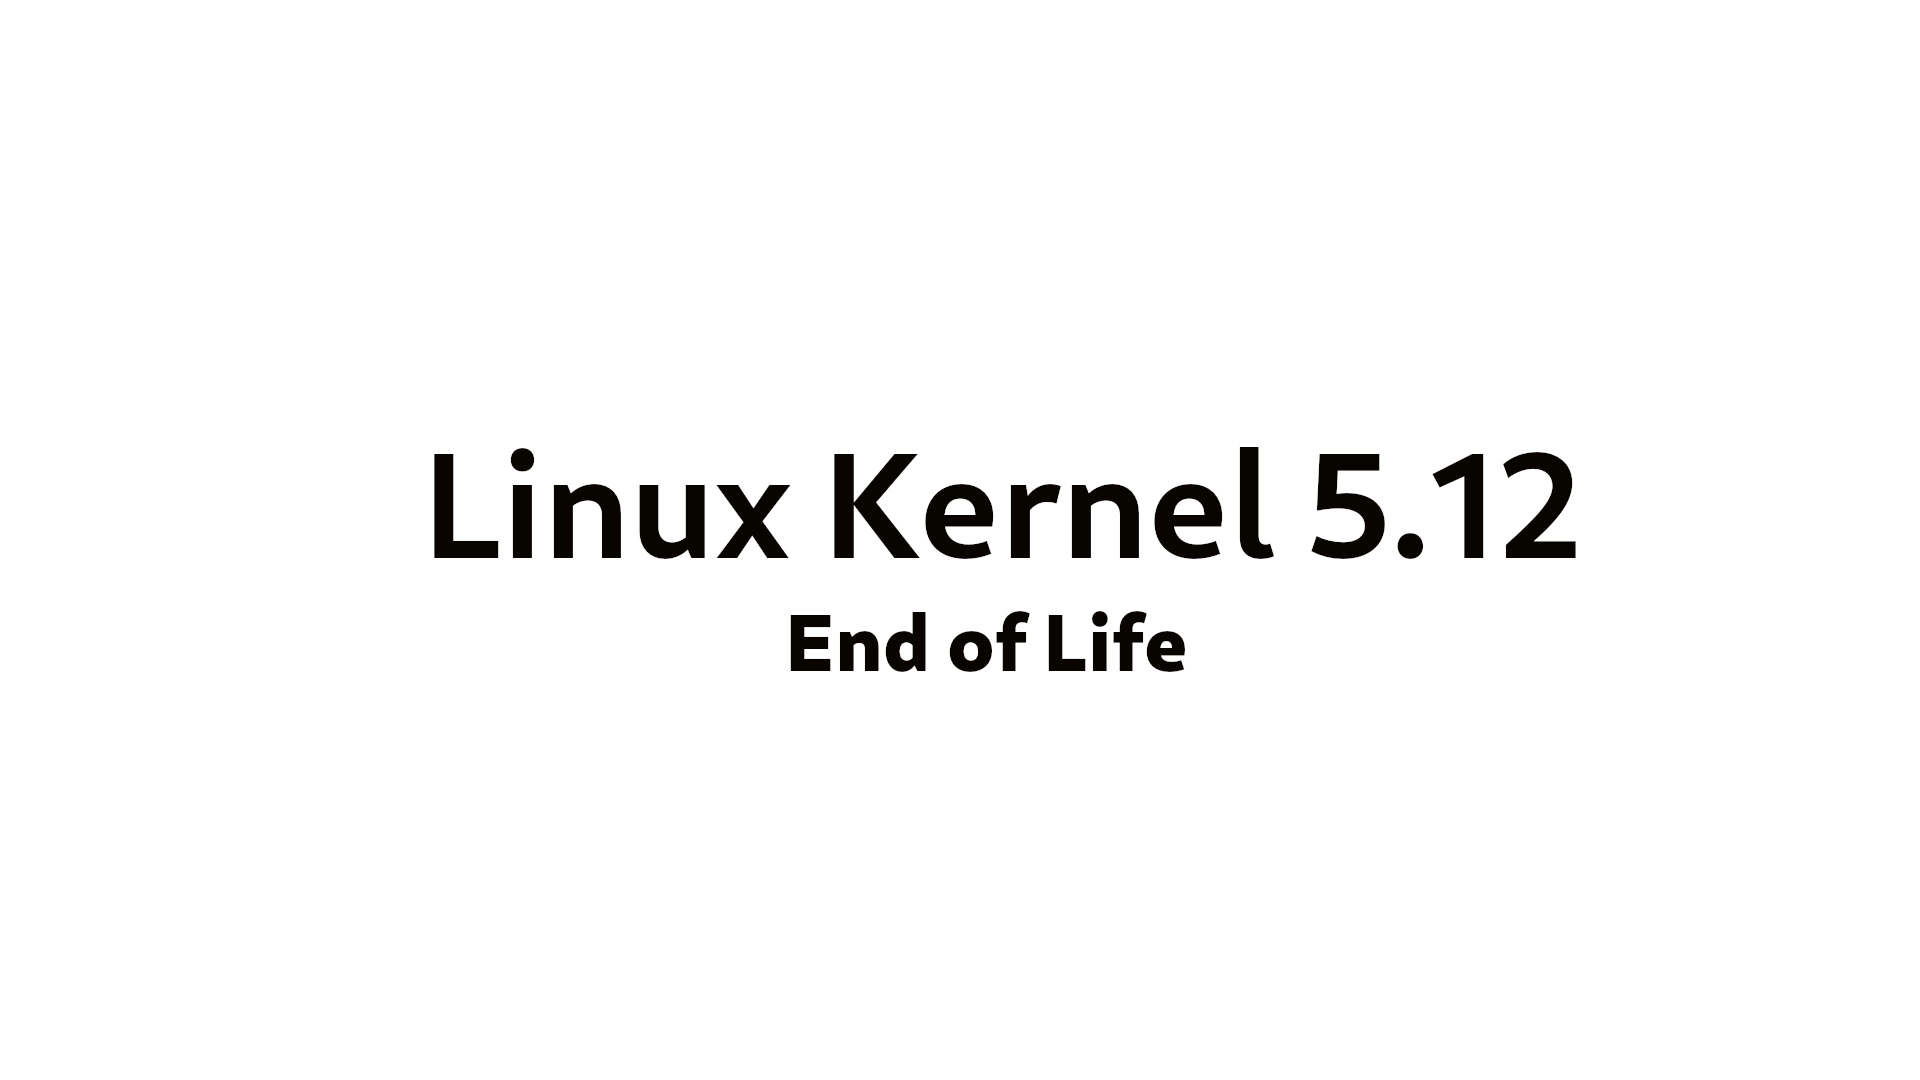 Linux 5.12 Kernel Reaches End of Life, Upgrade to Linux Kernel 5.13 Now